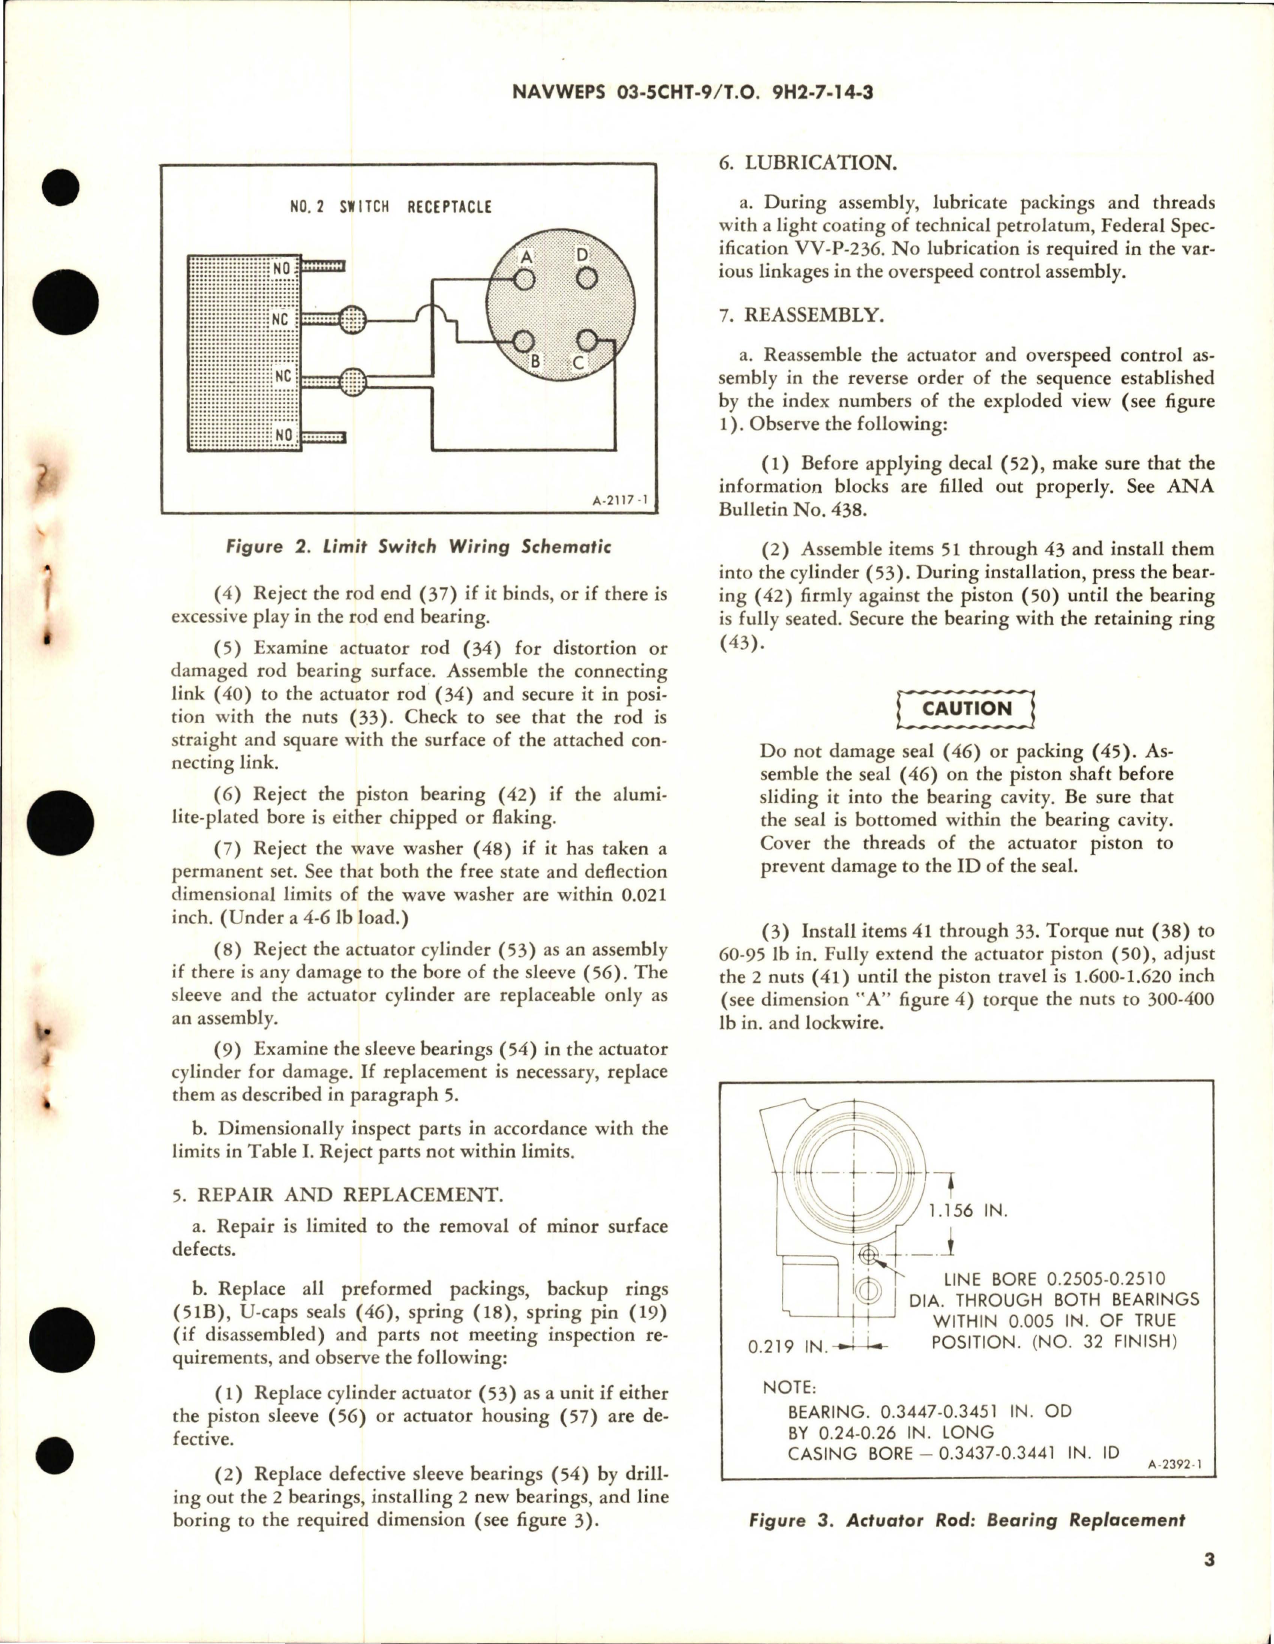 Sample page 5 from AirCorps Library document: Overhaul Instructions with Parts Breakdown for Actuator and Overspeed Control Assembly Part 37C300431G001